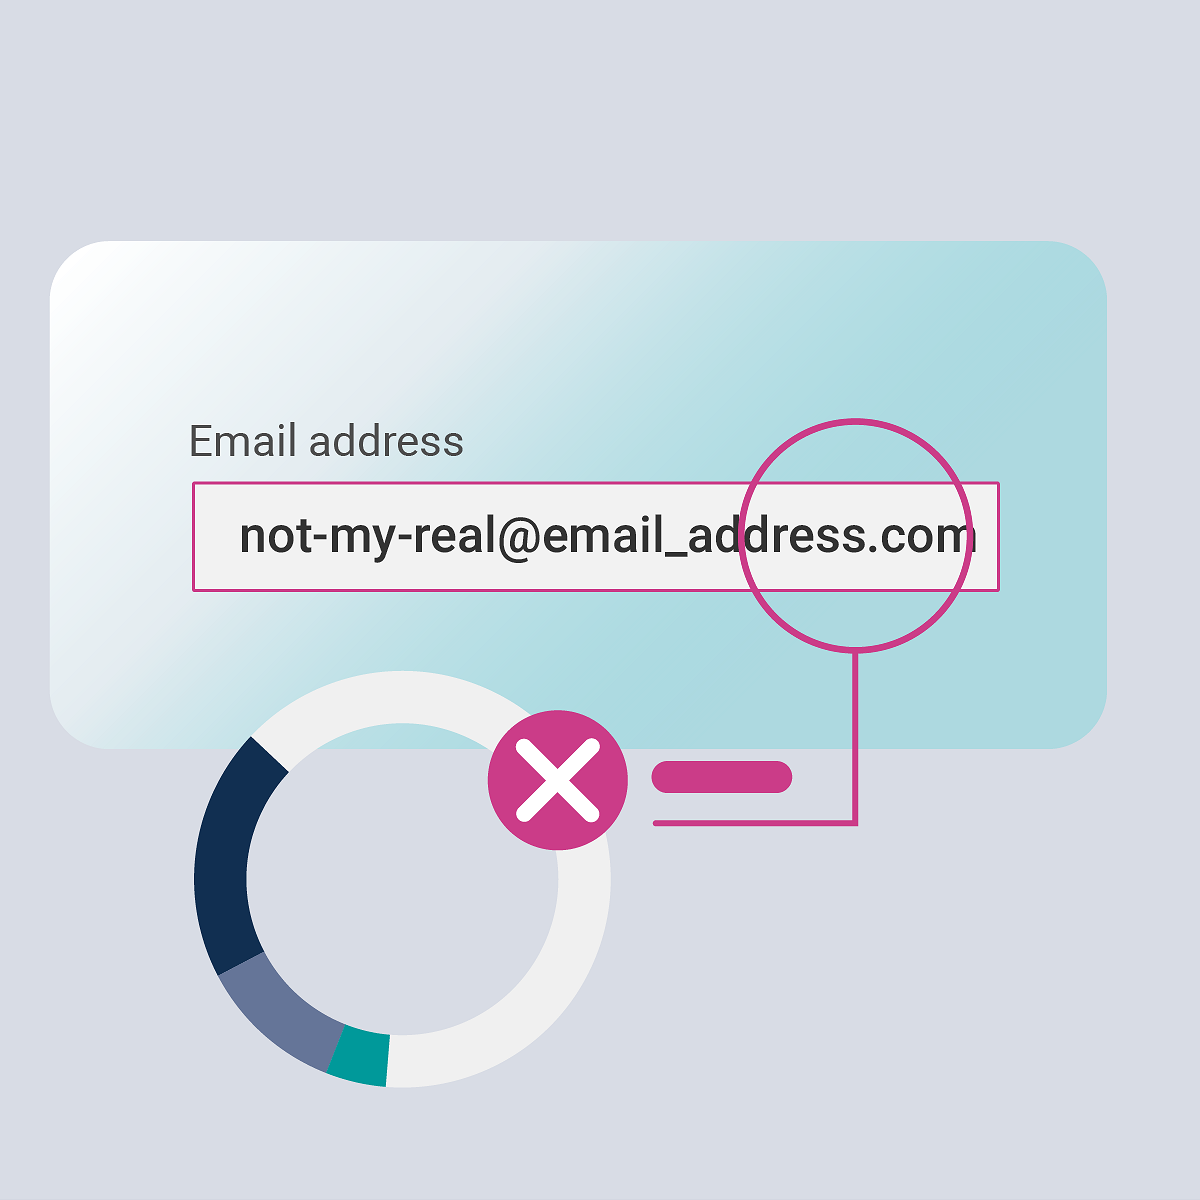 How do I stop site visitors signing up with fake email addresses?